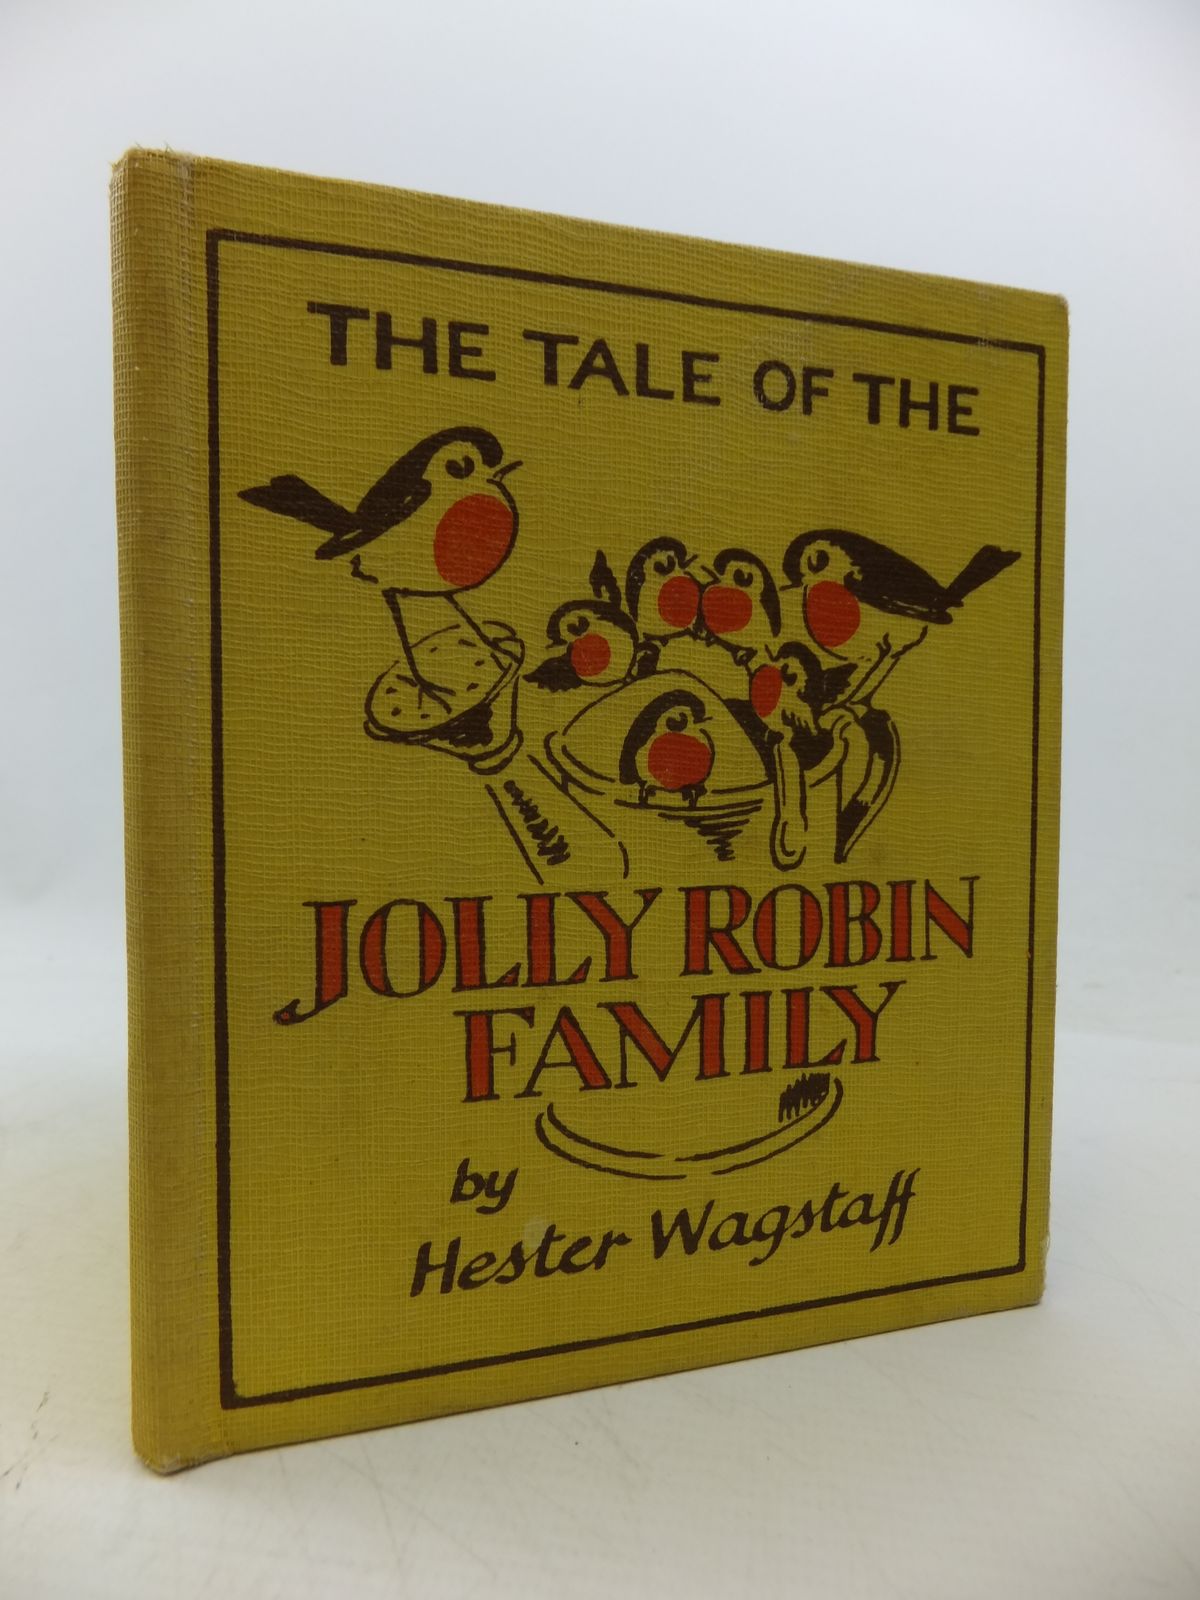 The tale of jolly robin